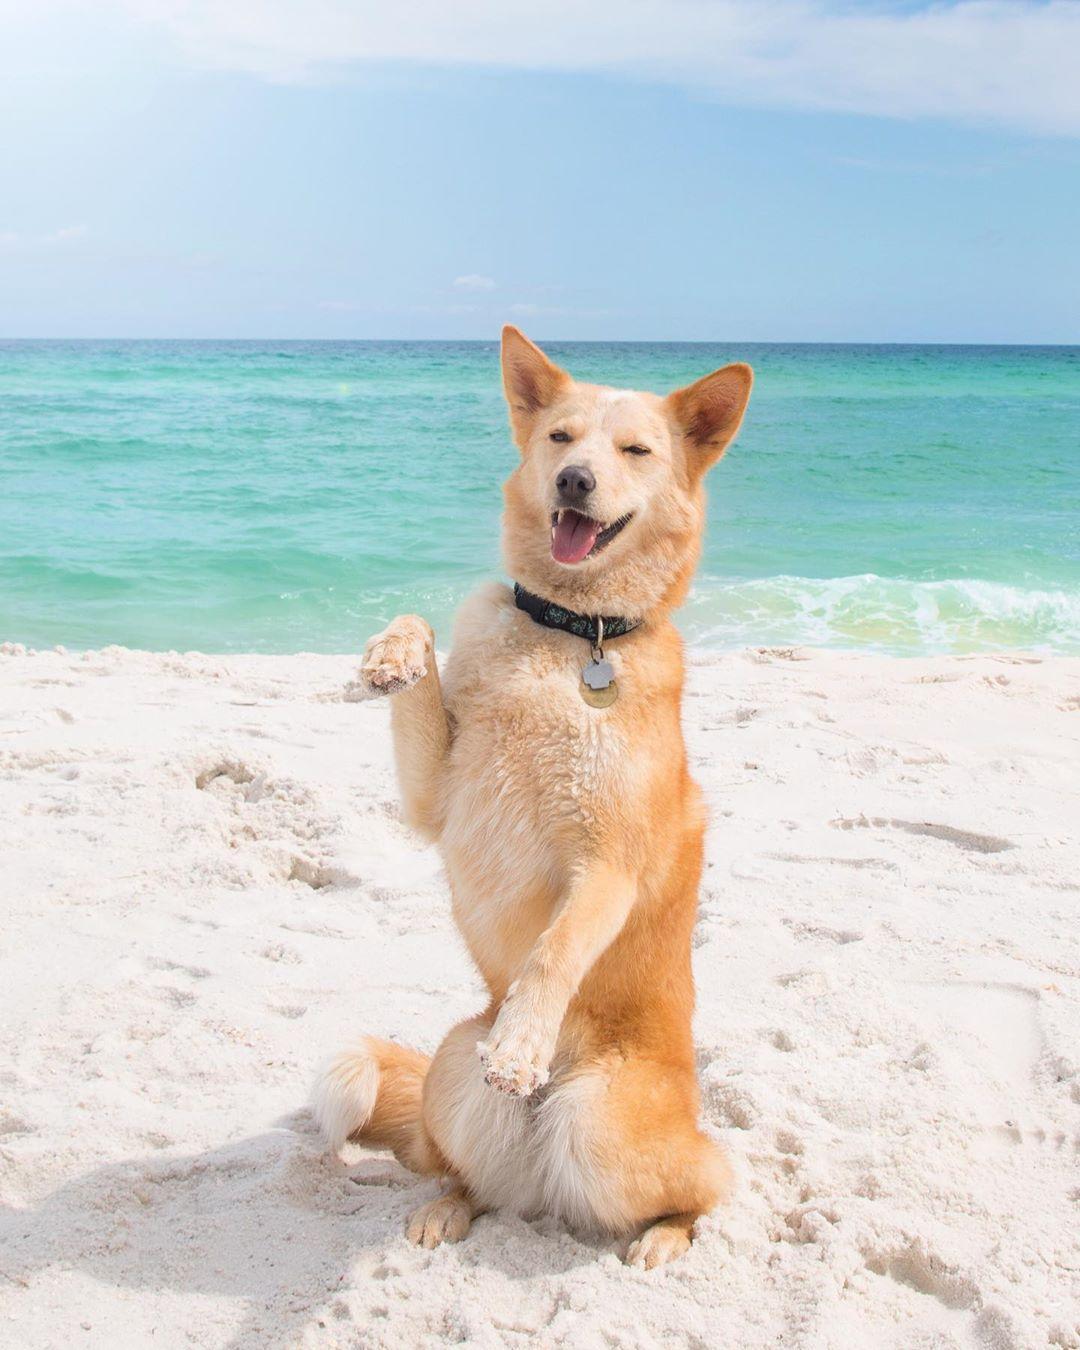 You Can’t Spell Florida Without “Fido:” A Dog-Friendly Guide to the Sunshine State